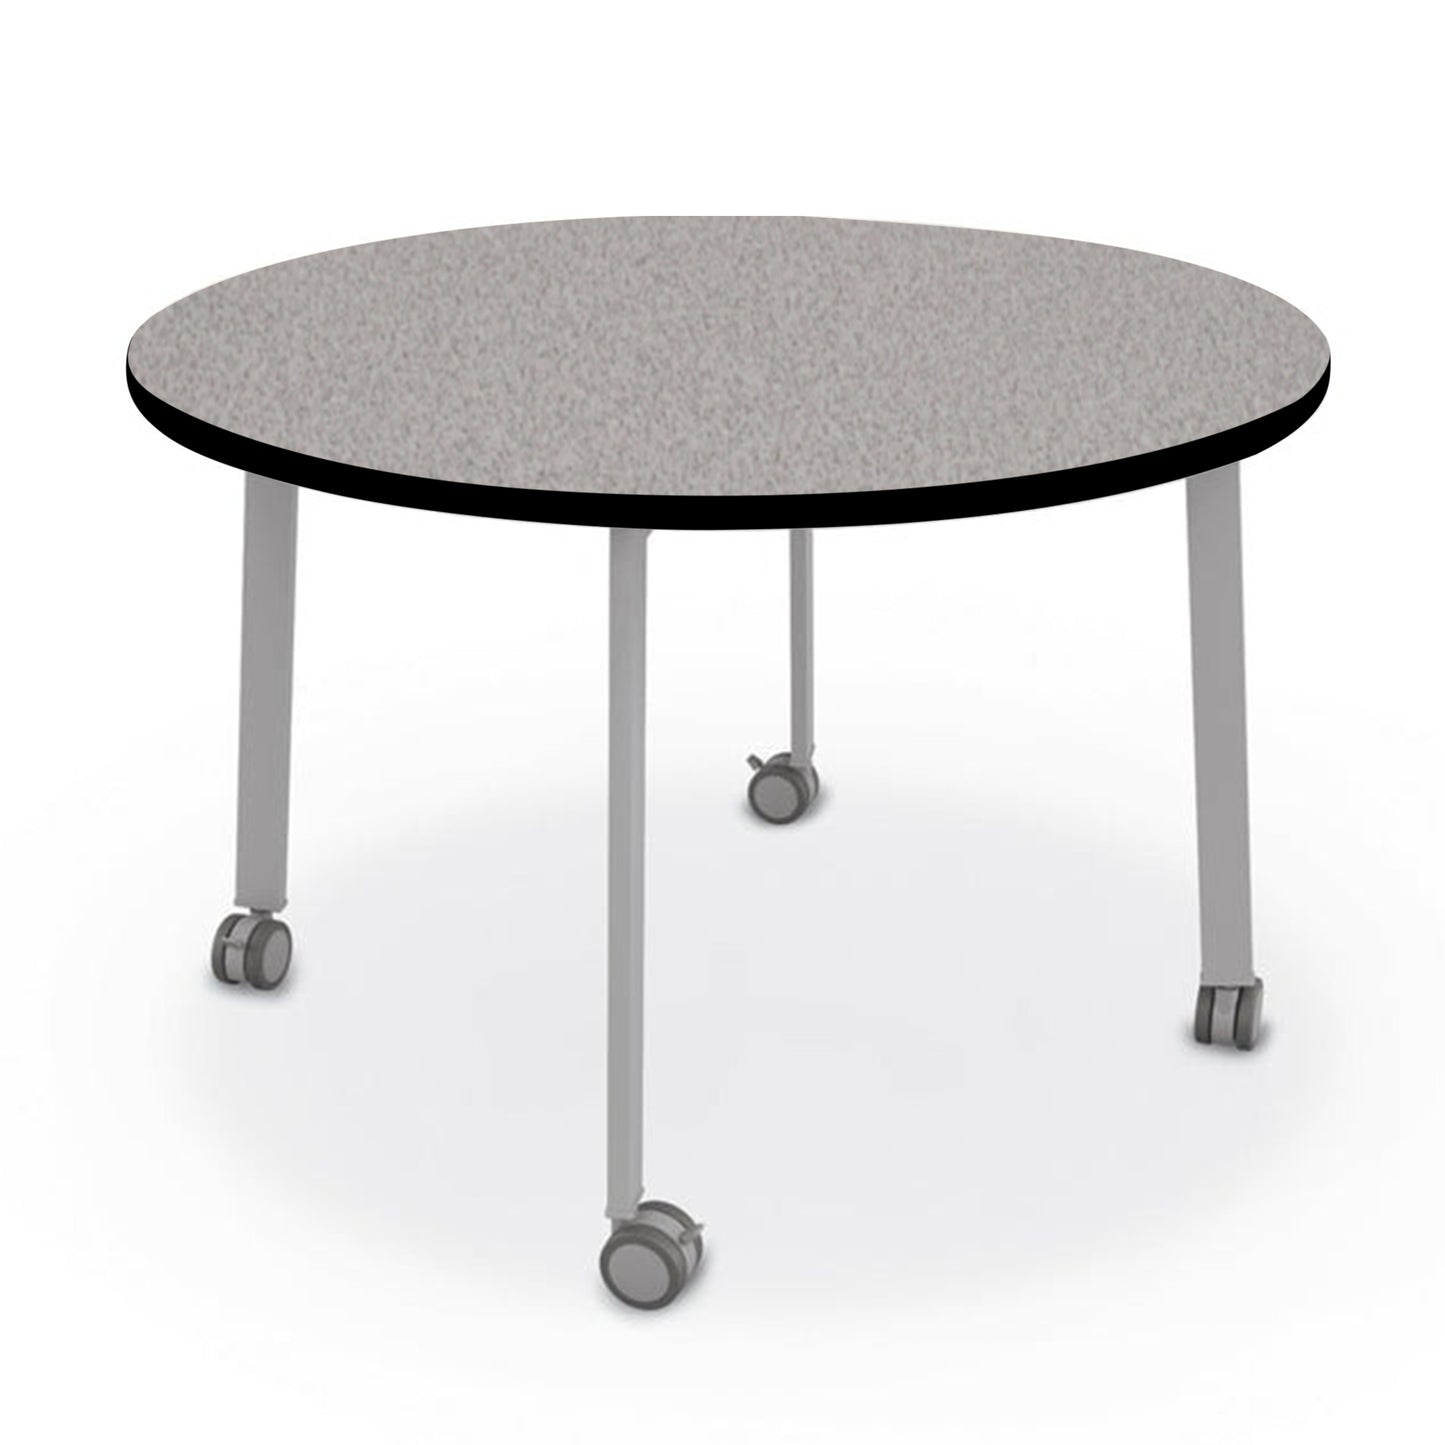 Mooreco Akt Table – 48" Round, Laminate Top, Fixed Height Available in 29"H, 36"H, or 42"H